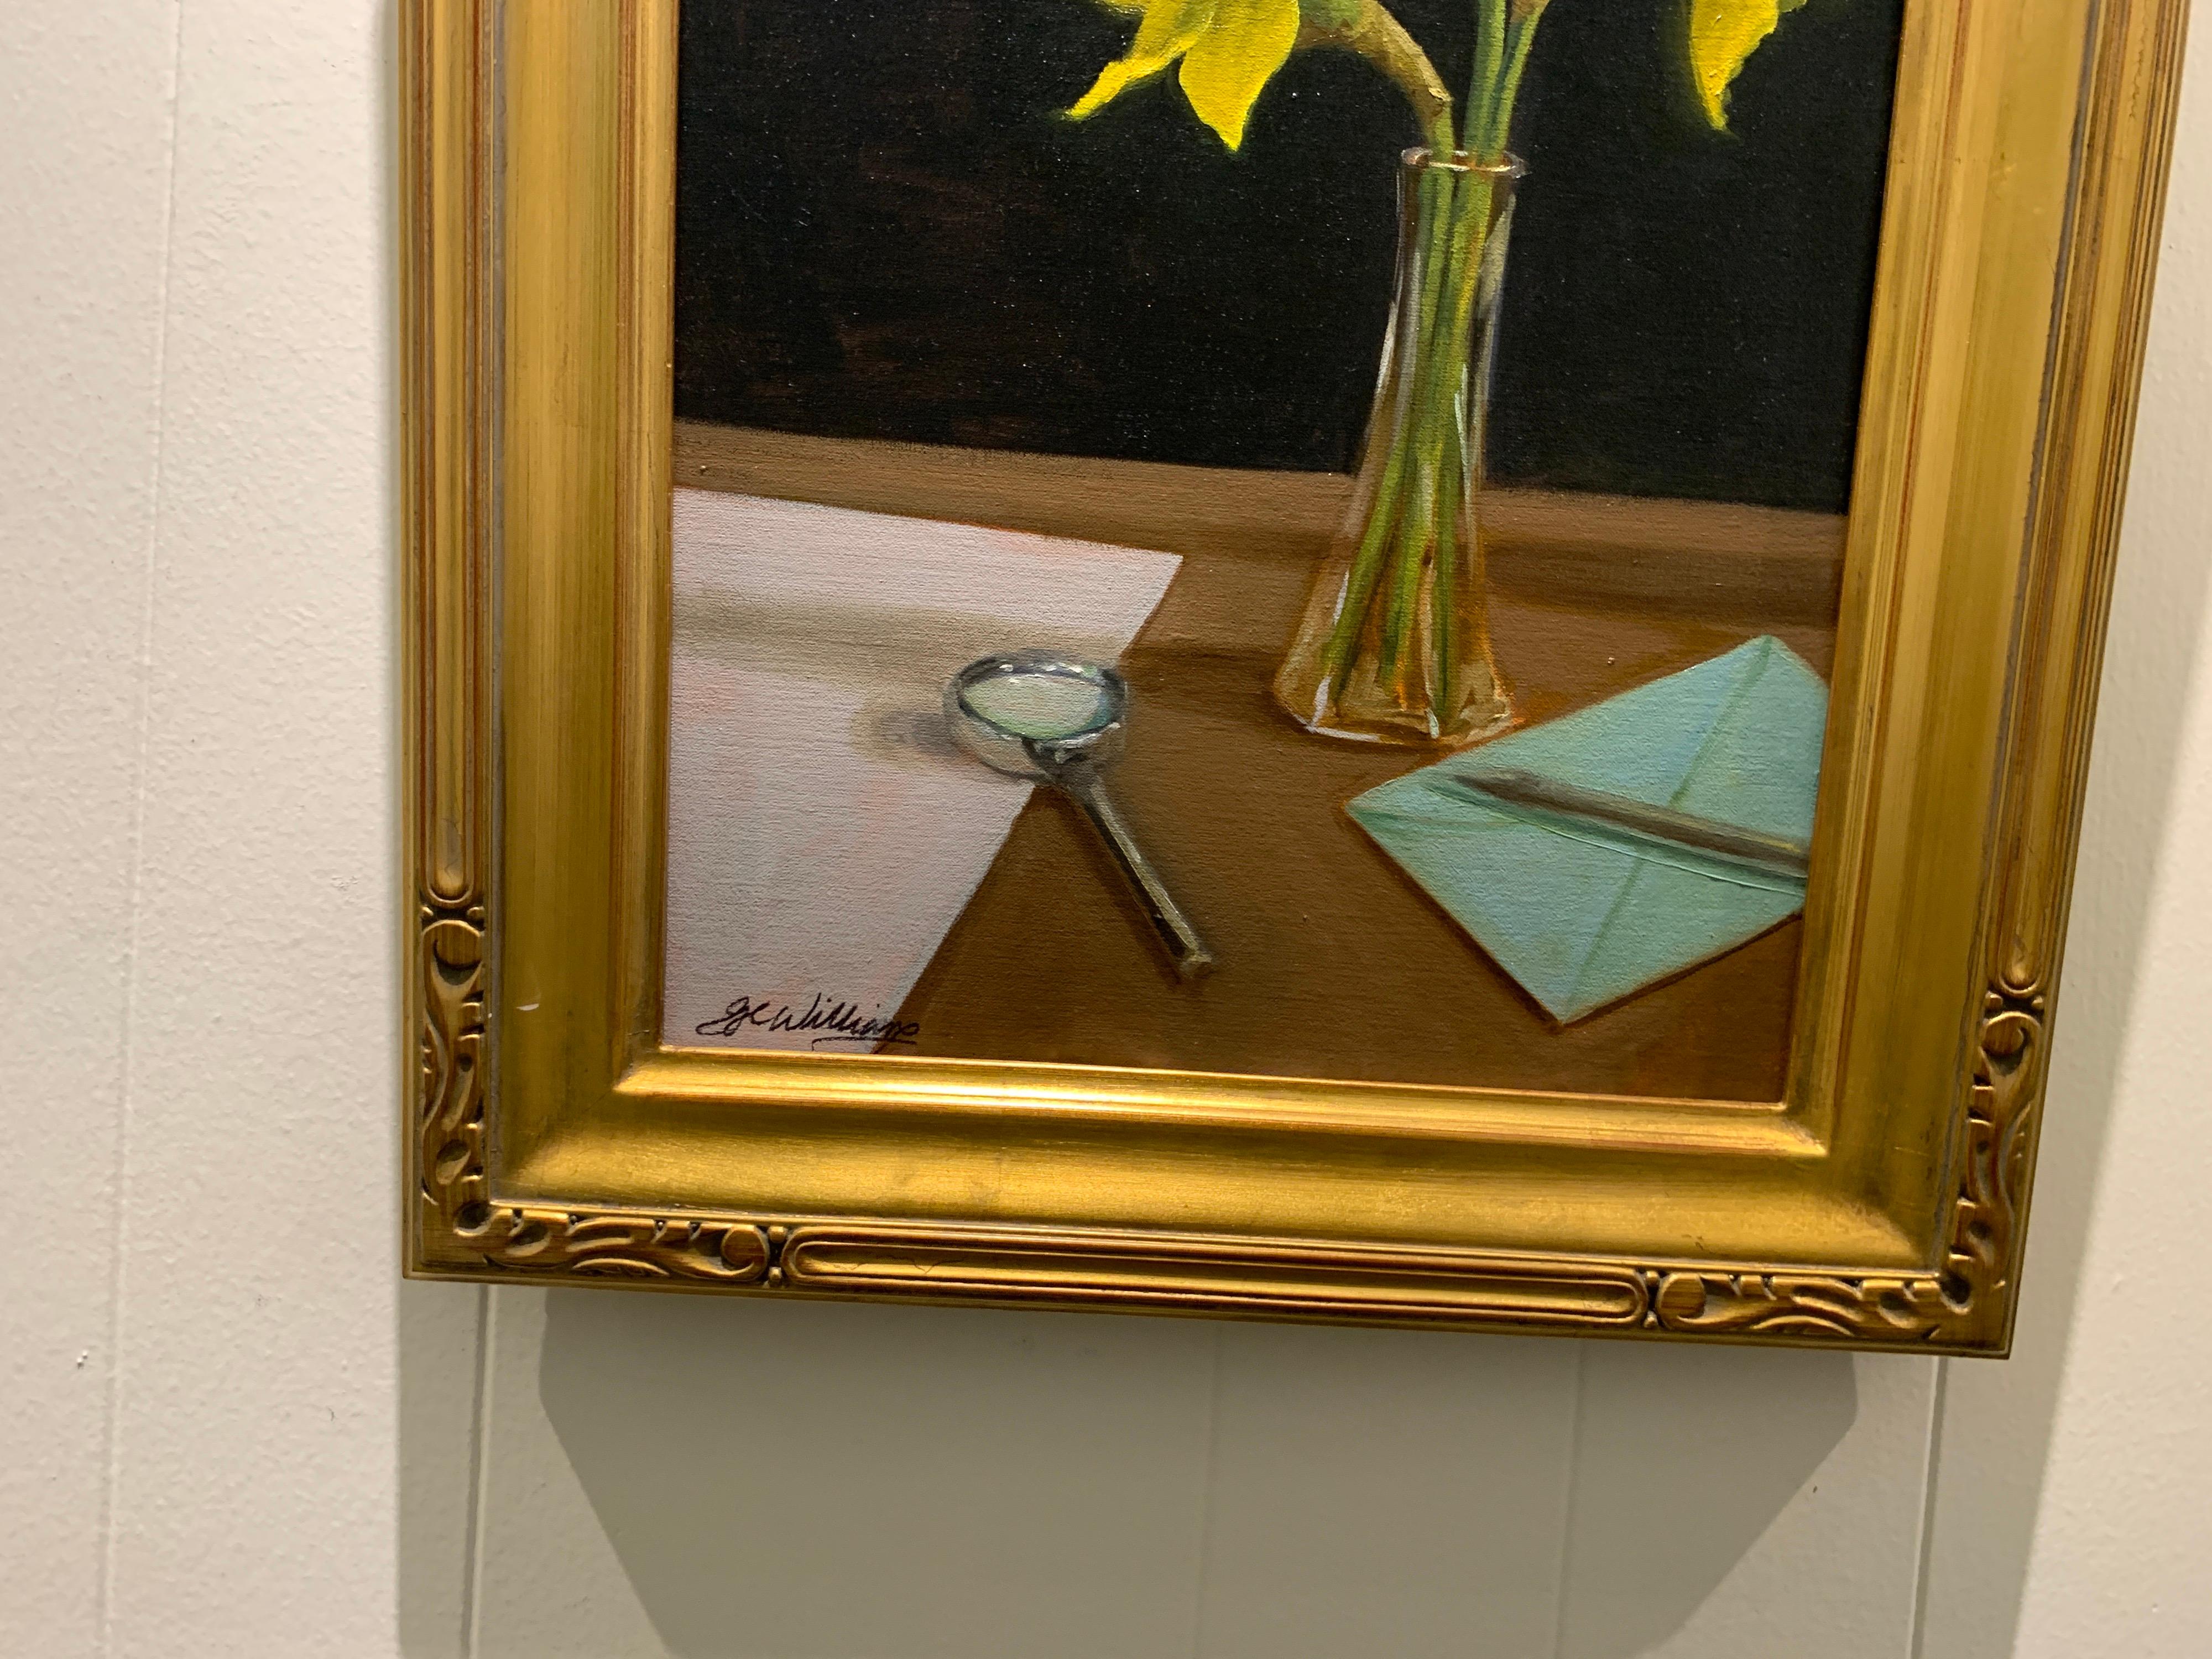 Searching for Signs of Spring by Ginny Williams, Framed Realist Painting 1